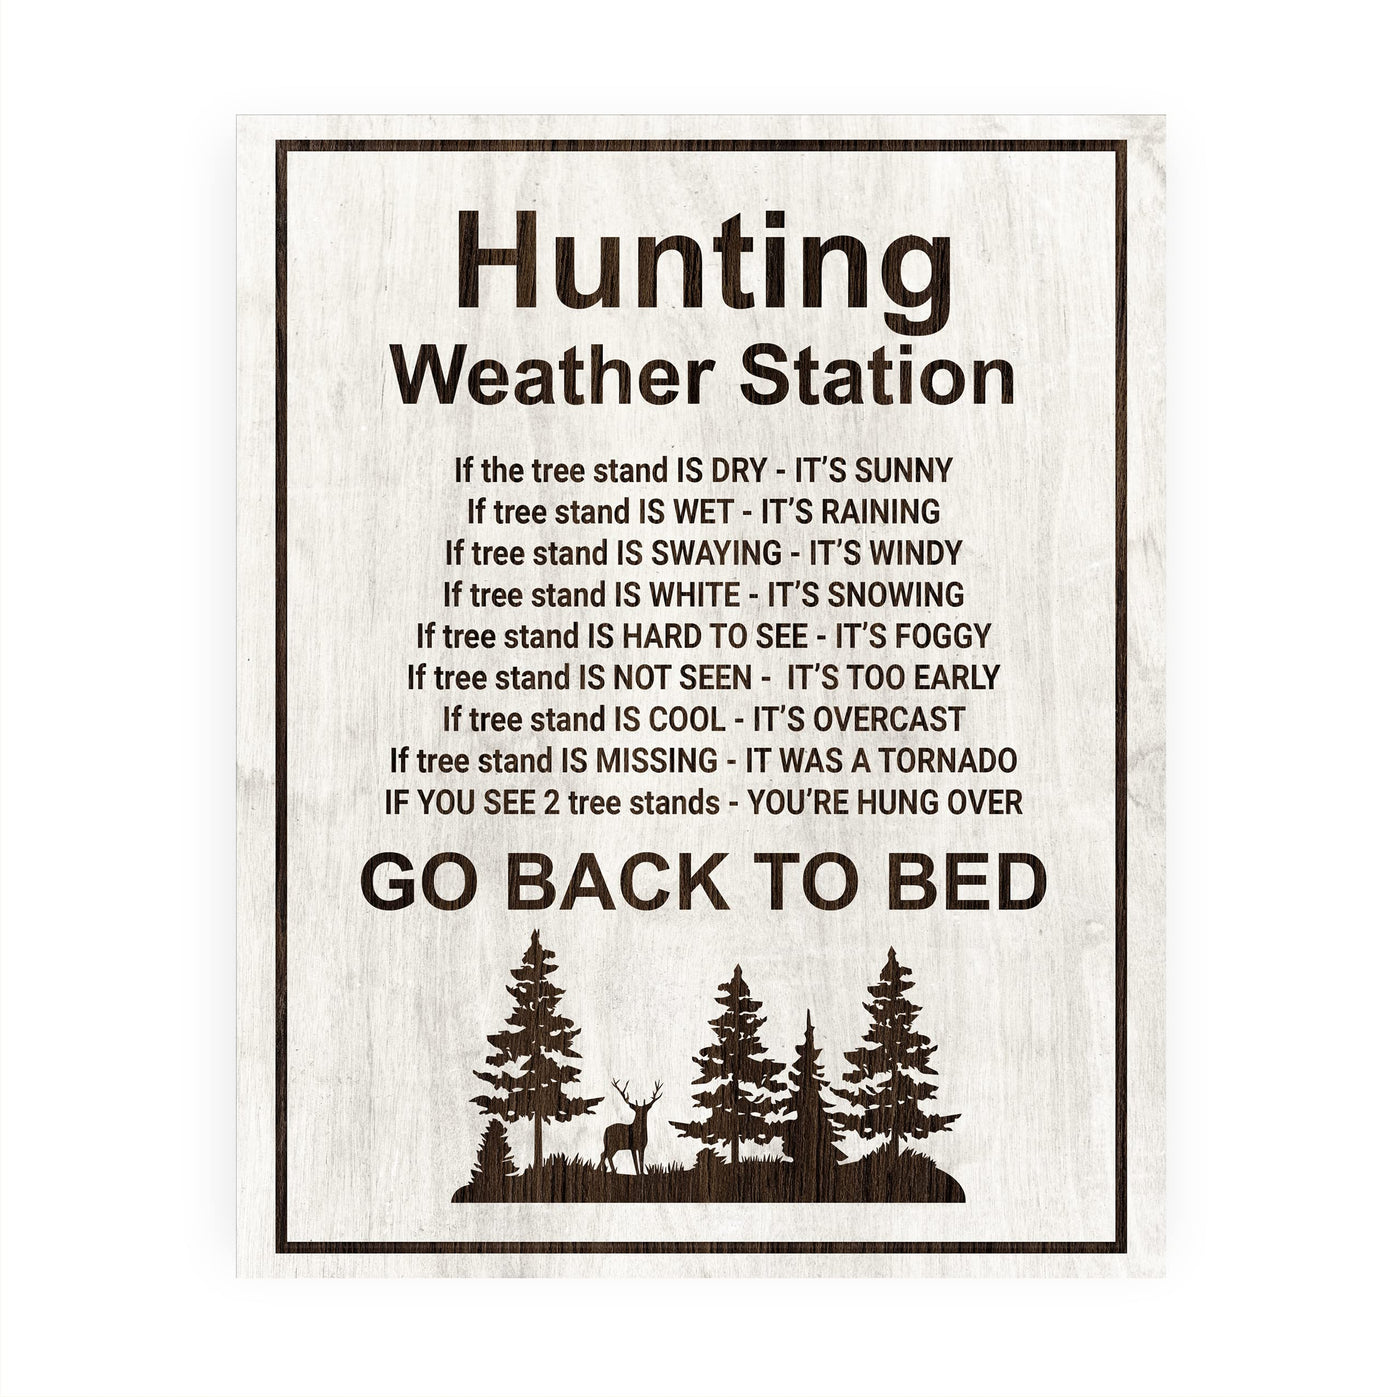 Hunting Weather Station-Funny Hunt Season Wall Sign -8 x 10" Country Rustic Art Print -Ready to Frame. Perfect Wall Decoration for Home-Lodge-Man Cave-Cabin-Outdoors Decor. Fun Gift for Hunters!